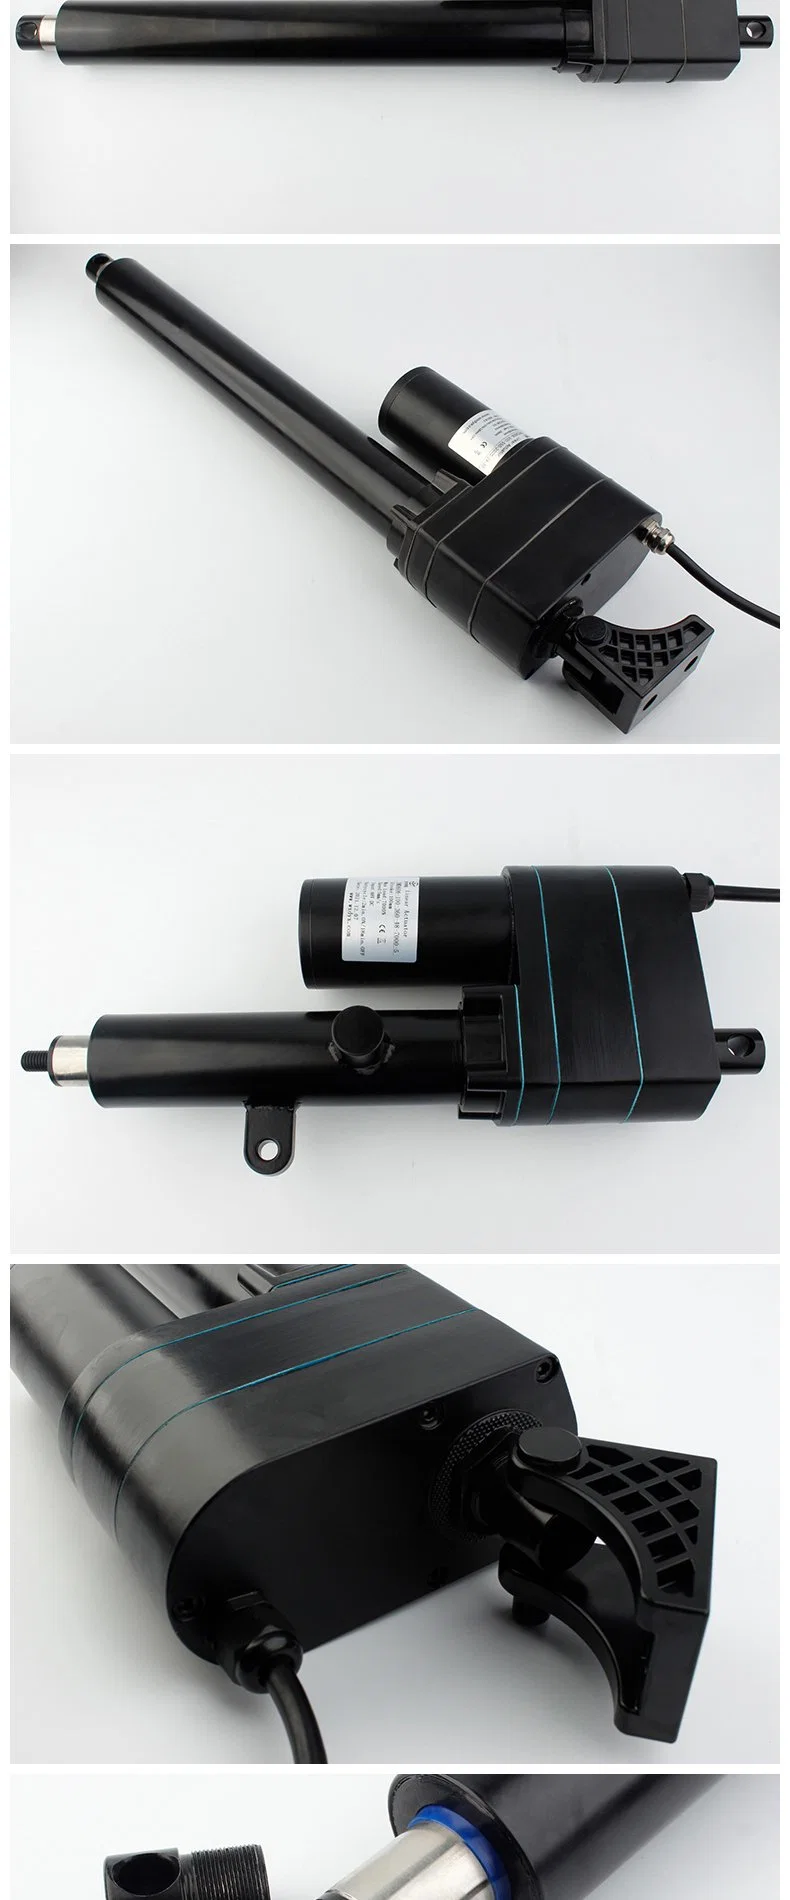 Actuator Linear 12V Geared Motor Electric Linear Actuator 8000n with Potenyiometer